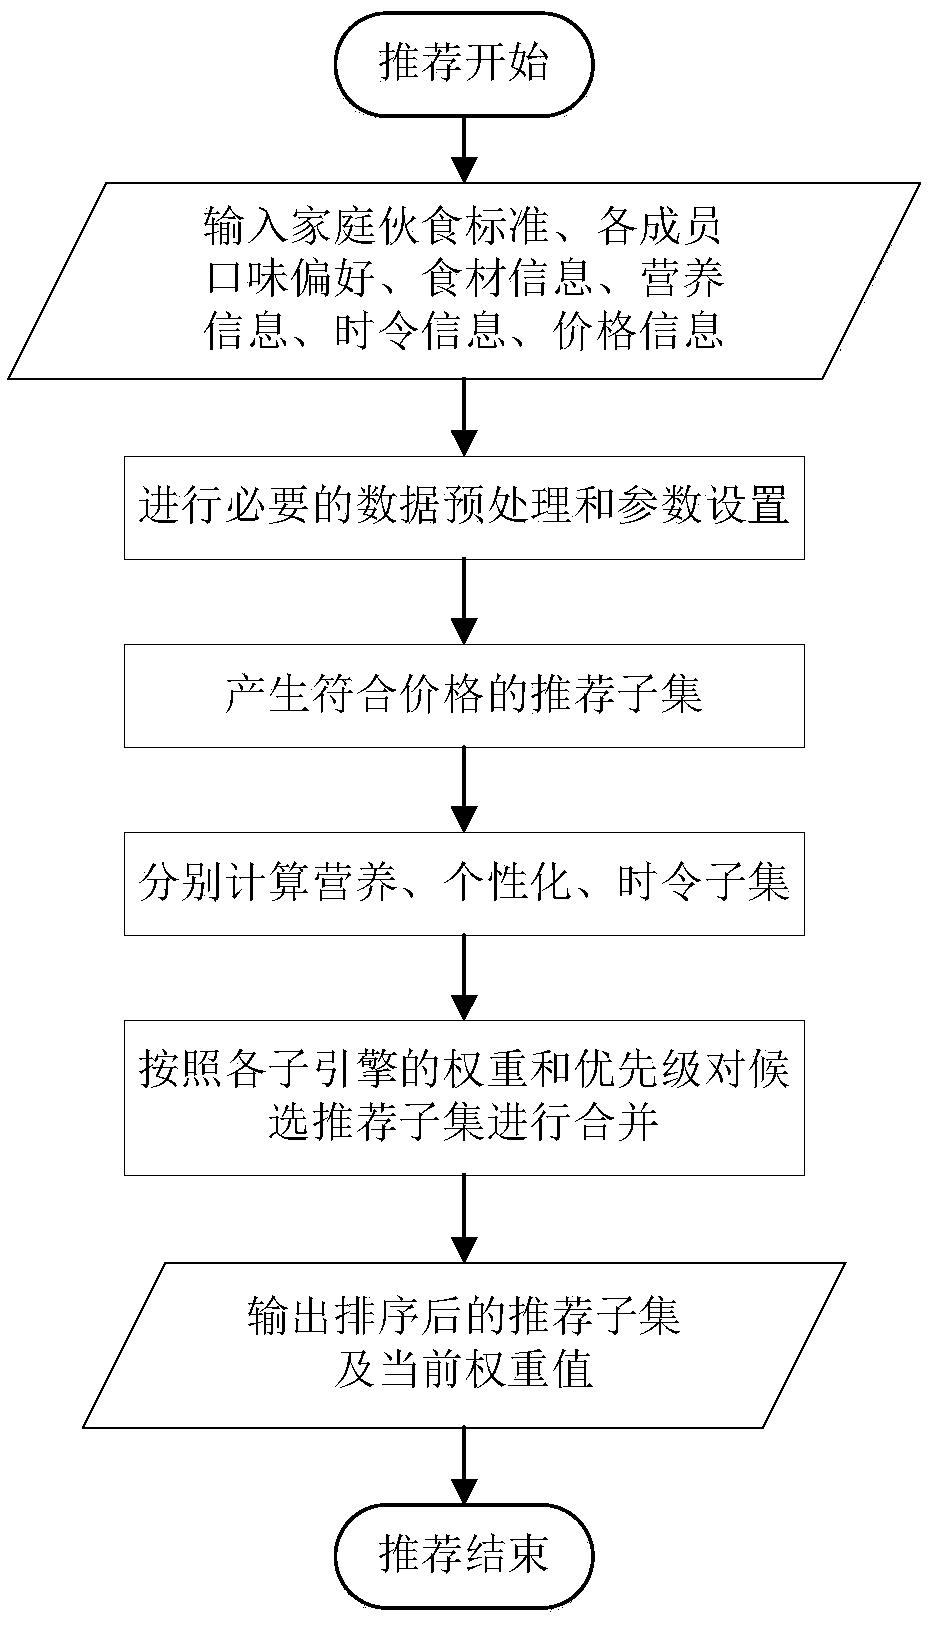 Dietary information recommendation method